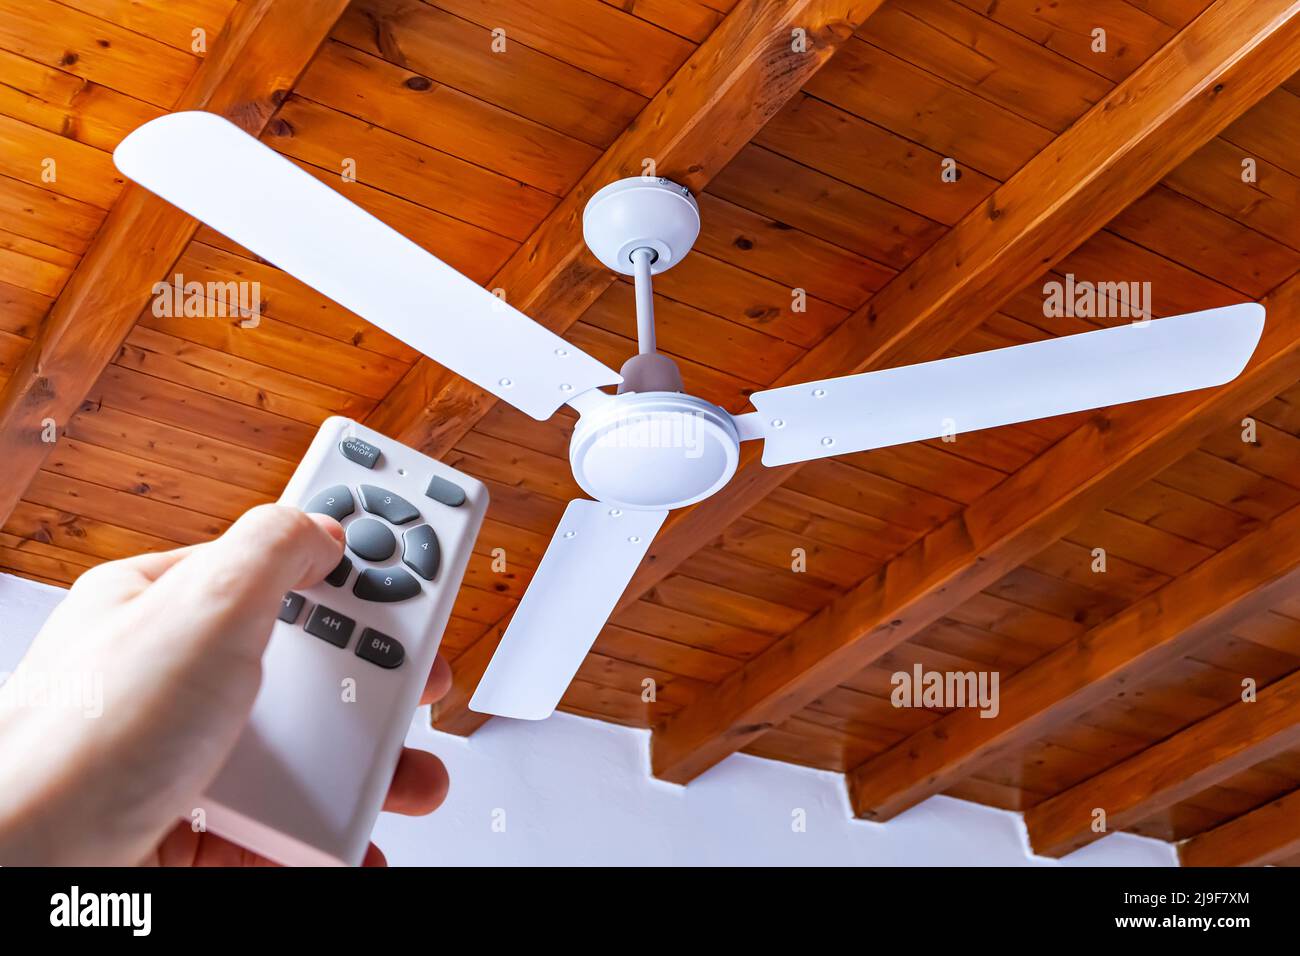 A man uses a remote control to turn on a white ceiling fan mounted in a house with wooden ceilings. Stock Photo